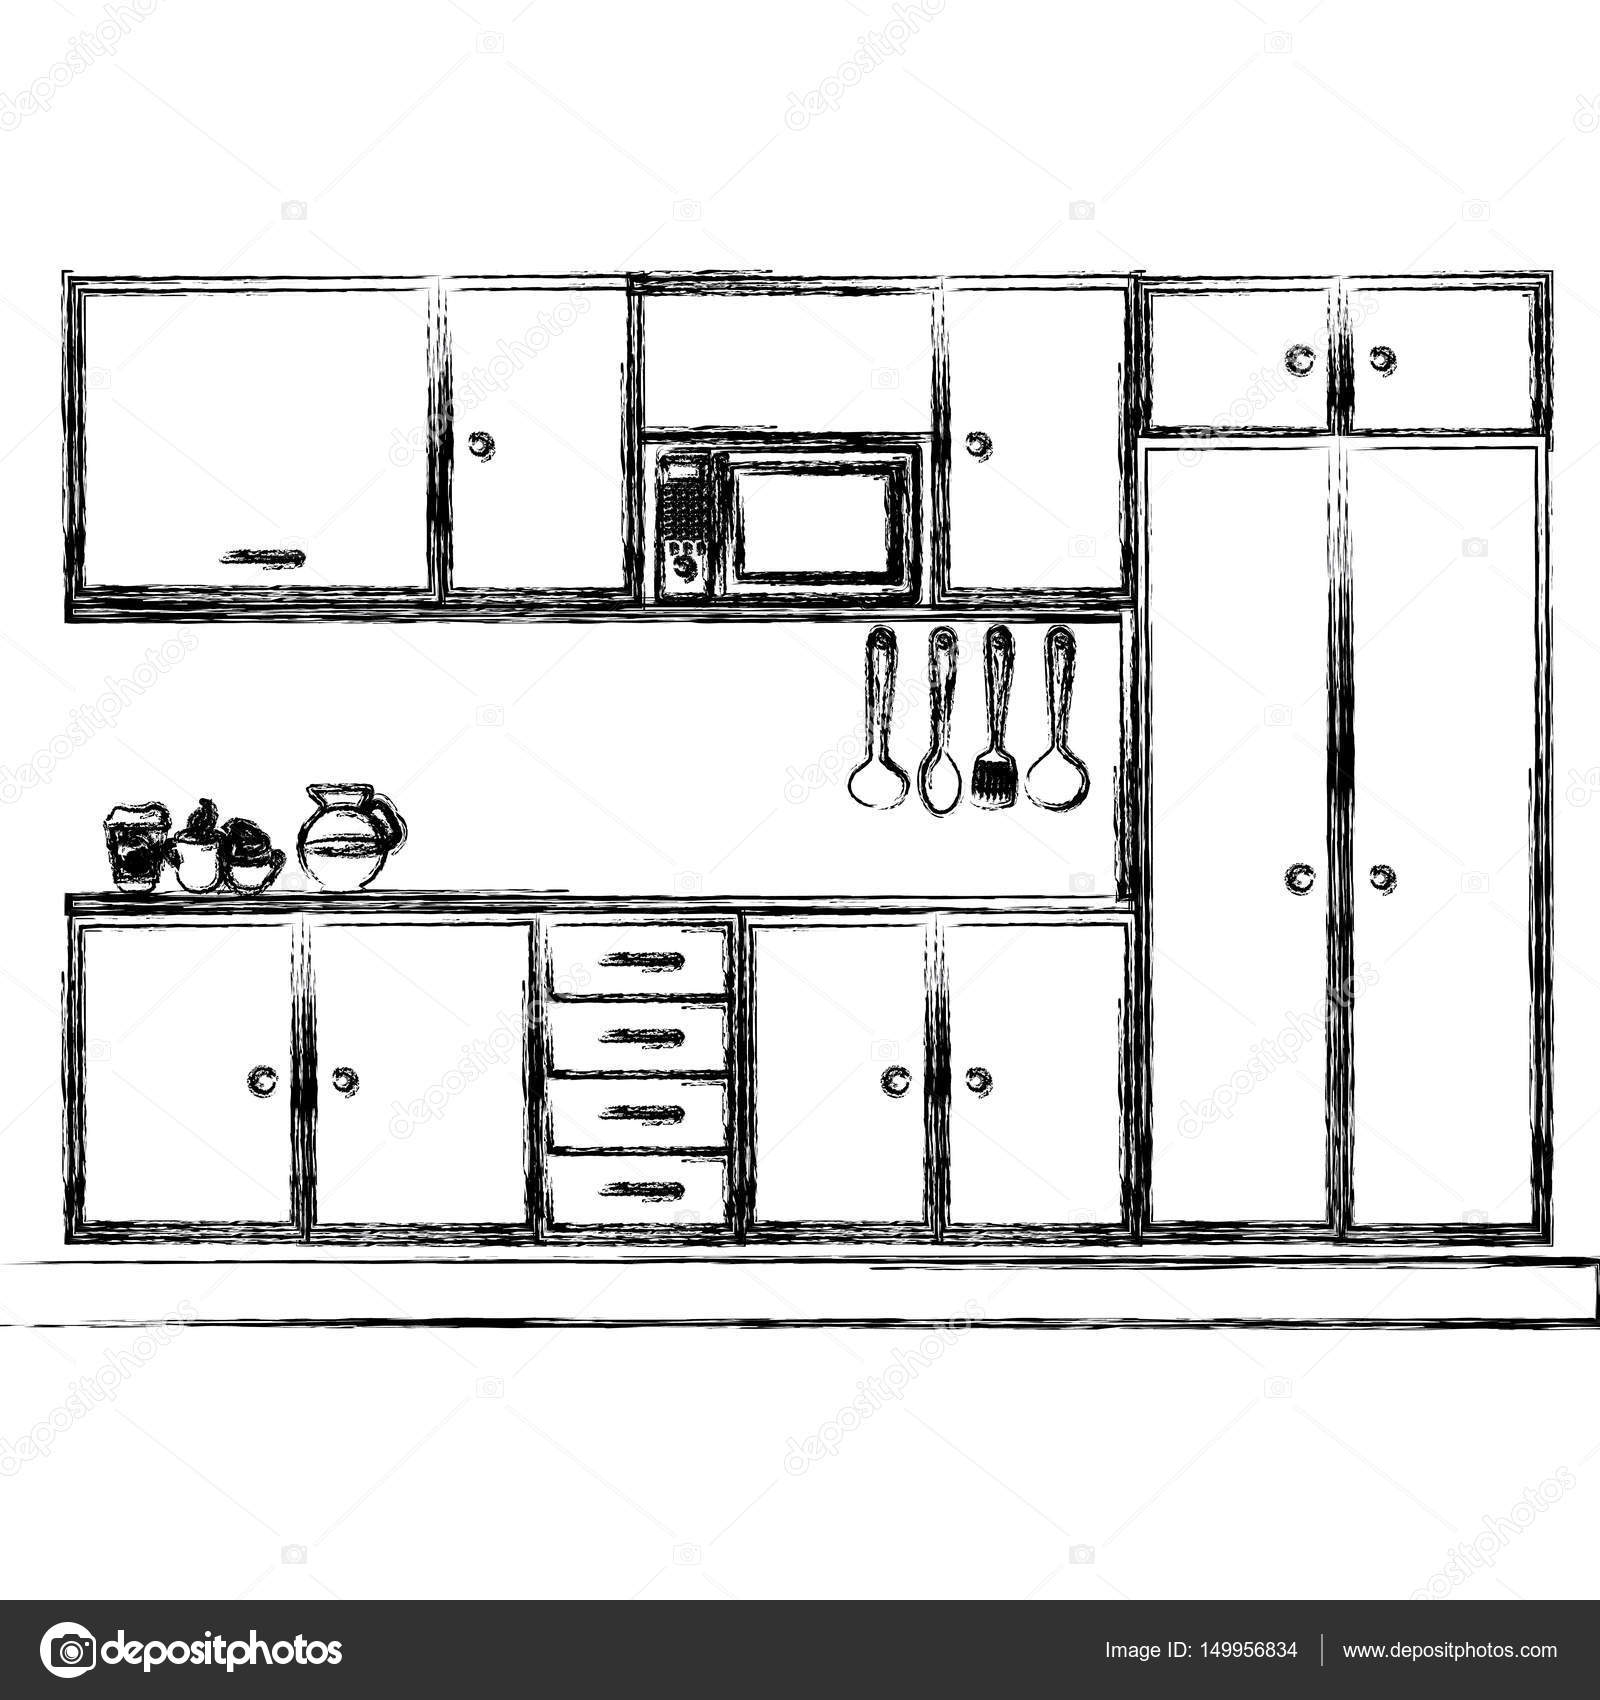 Monochrome Sketch Of Modern Kitchen Cabinets Stock Vector